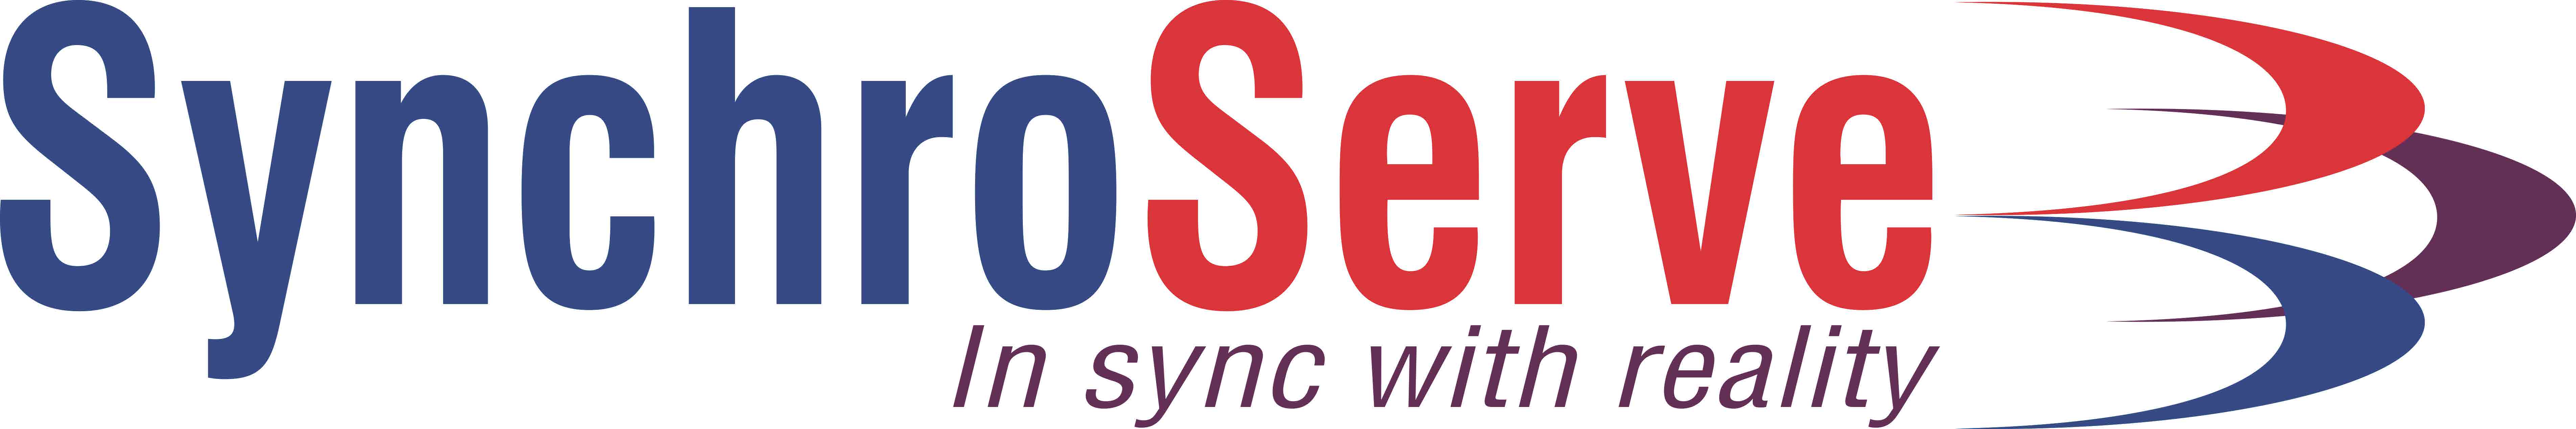 Synchroserve Global Solutions Private Limited